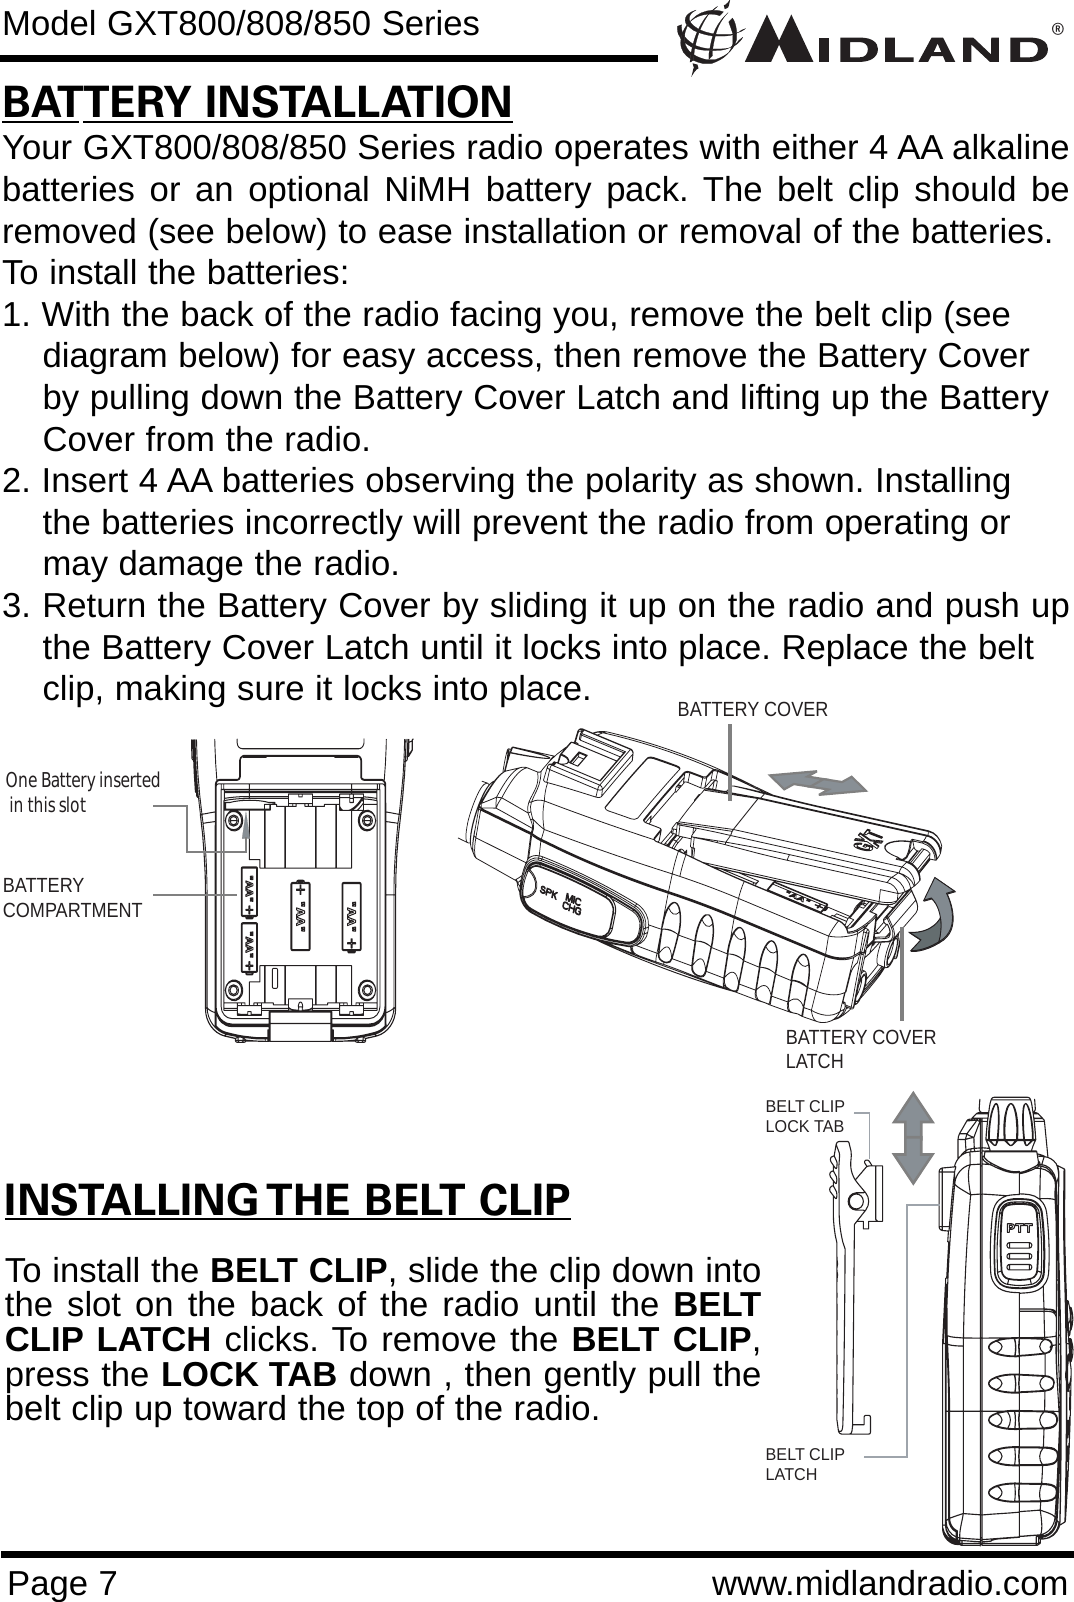 ®Page 7 www.midlandradio.comBATTERY INSTALLATIONYour GXT800/808/850 Series radio operates with either 4 AA alkalinebatteries or an optional NiMH battery pack. The belt clip should beremoved (see below) to ease installation or removal of the batteries. To install the batteries:1. With the back of the radio facing you, remove the belt clip (see    diagram below) for easy access, then remove the Battery Coverby pulling down the Battery Cover Latch and lifting up the Battery Cover from the radio.2. Insert 4 AA batteries observing the polarity as shown. Installingthe batteries incorrectly will prevent the radio from operating ormay damage the radio.3. Return the Battery Cover by sliding it up on the radio and push upthe Battery Cover Latch until it locks into place. Replace the belt clip, making sure it locks into place.Model GXT800/808/850 SeriesINSTALLING THE BELT CLIPTo install the BELT CLIP, slide the clip down intothe slot on the back of the radio until the BELTCLIP LATCH clicks. To remove the BELT CLIP,press the LOCK TAB down , then gently pull thebelt clip up toward the top of the radio.BATTERYCOMPARTMENTOne Battery inserted  in this slotBATTERY COVERBATTERY COVERLATCHBELT CLIPLOCK TABBELT CLIP LATCH